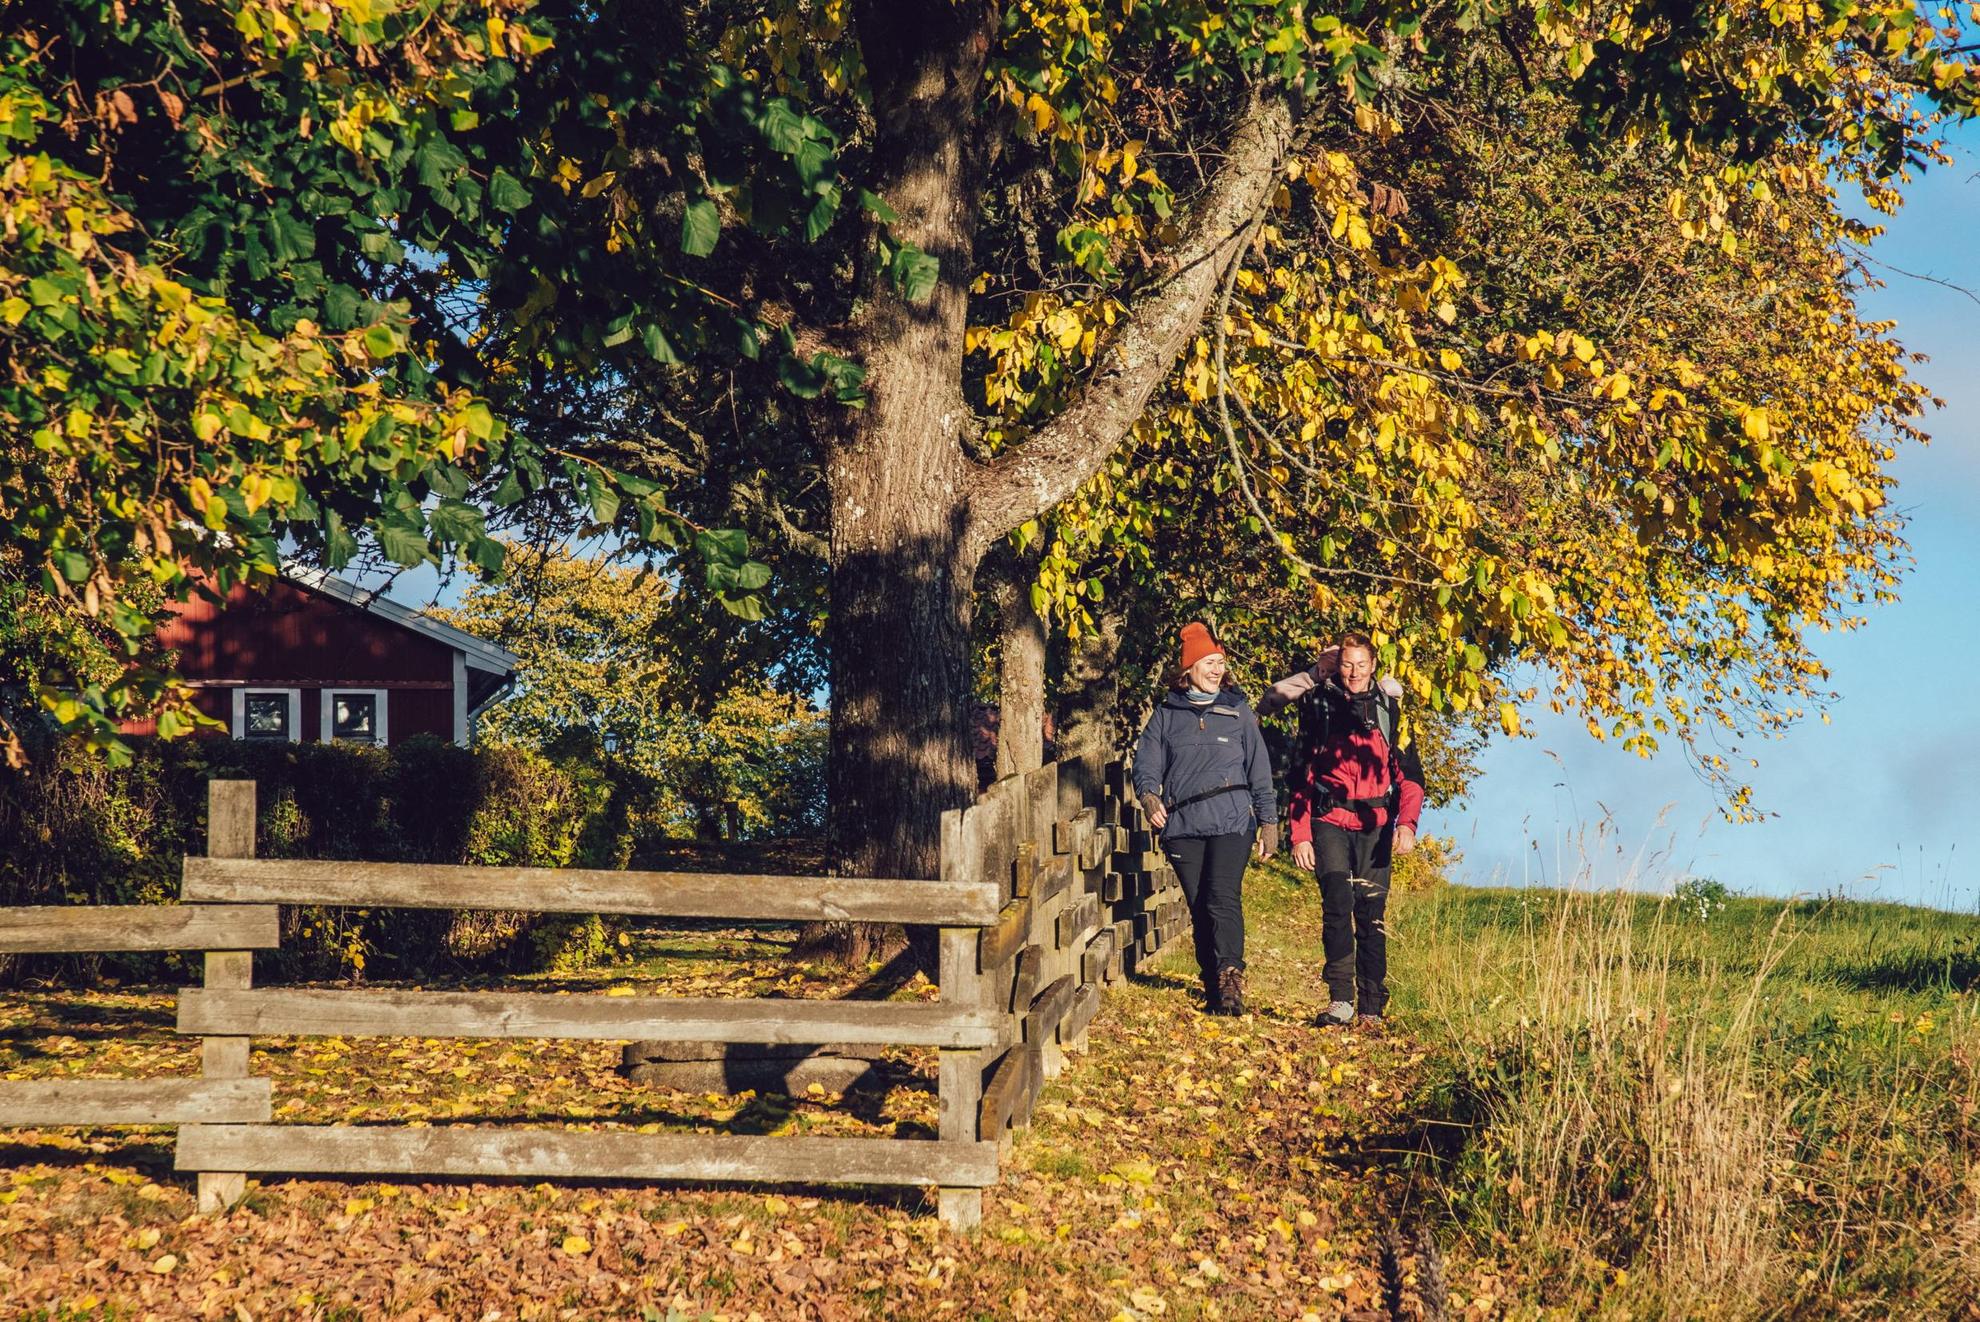 Two people are walking next to a wooden fence on a sunny autumn day.